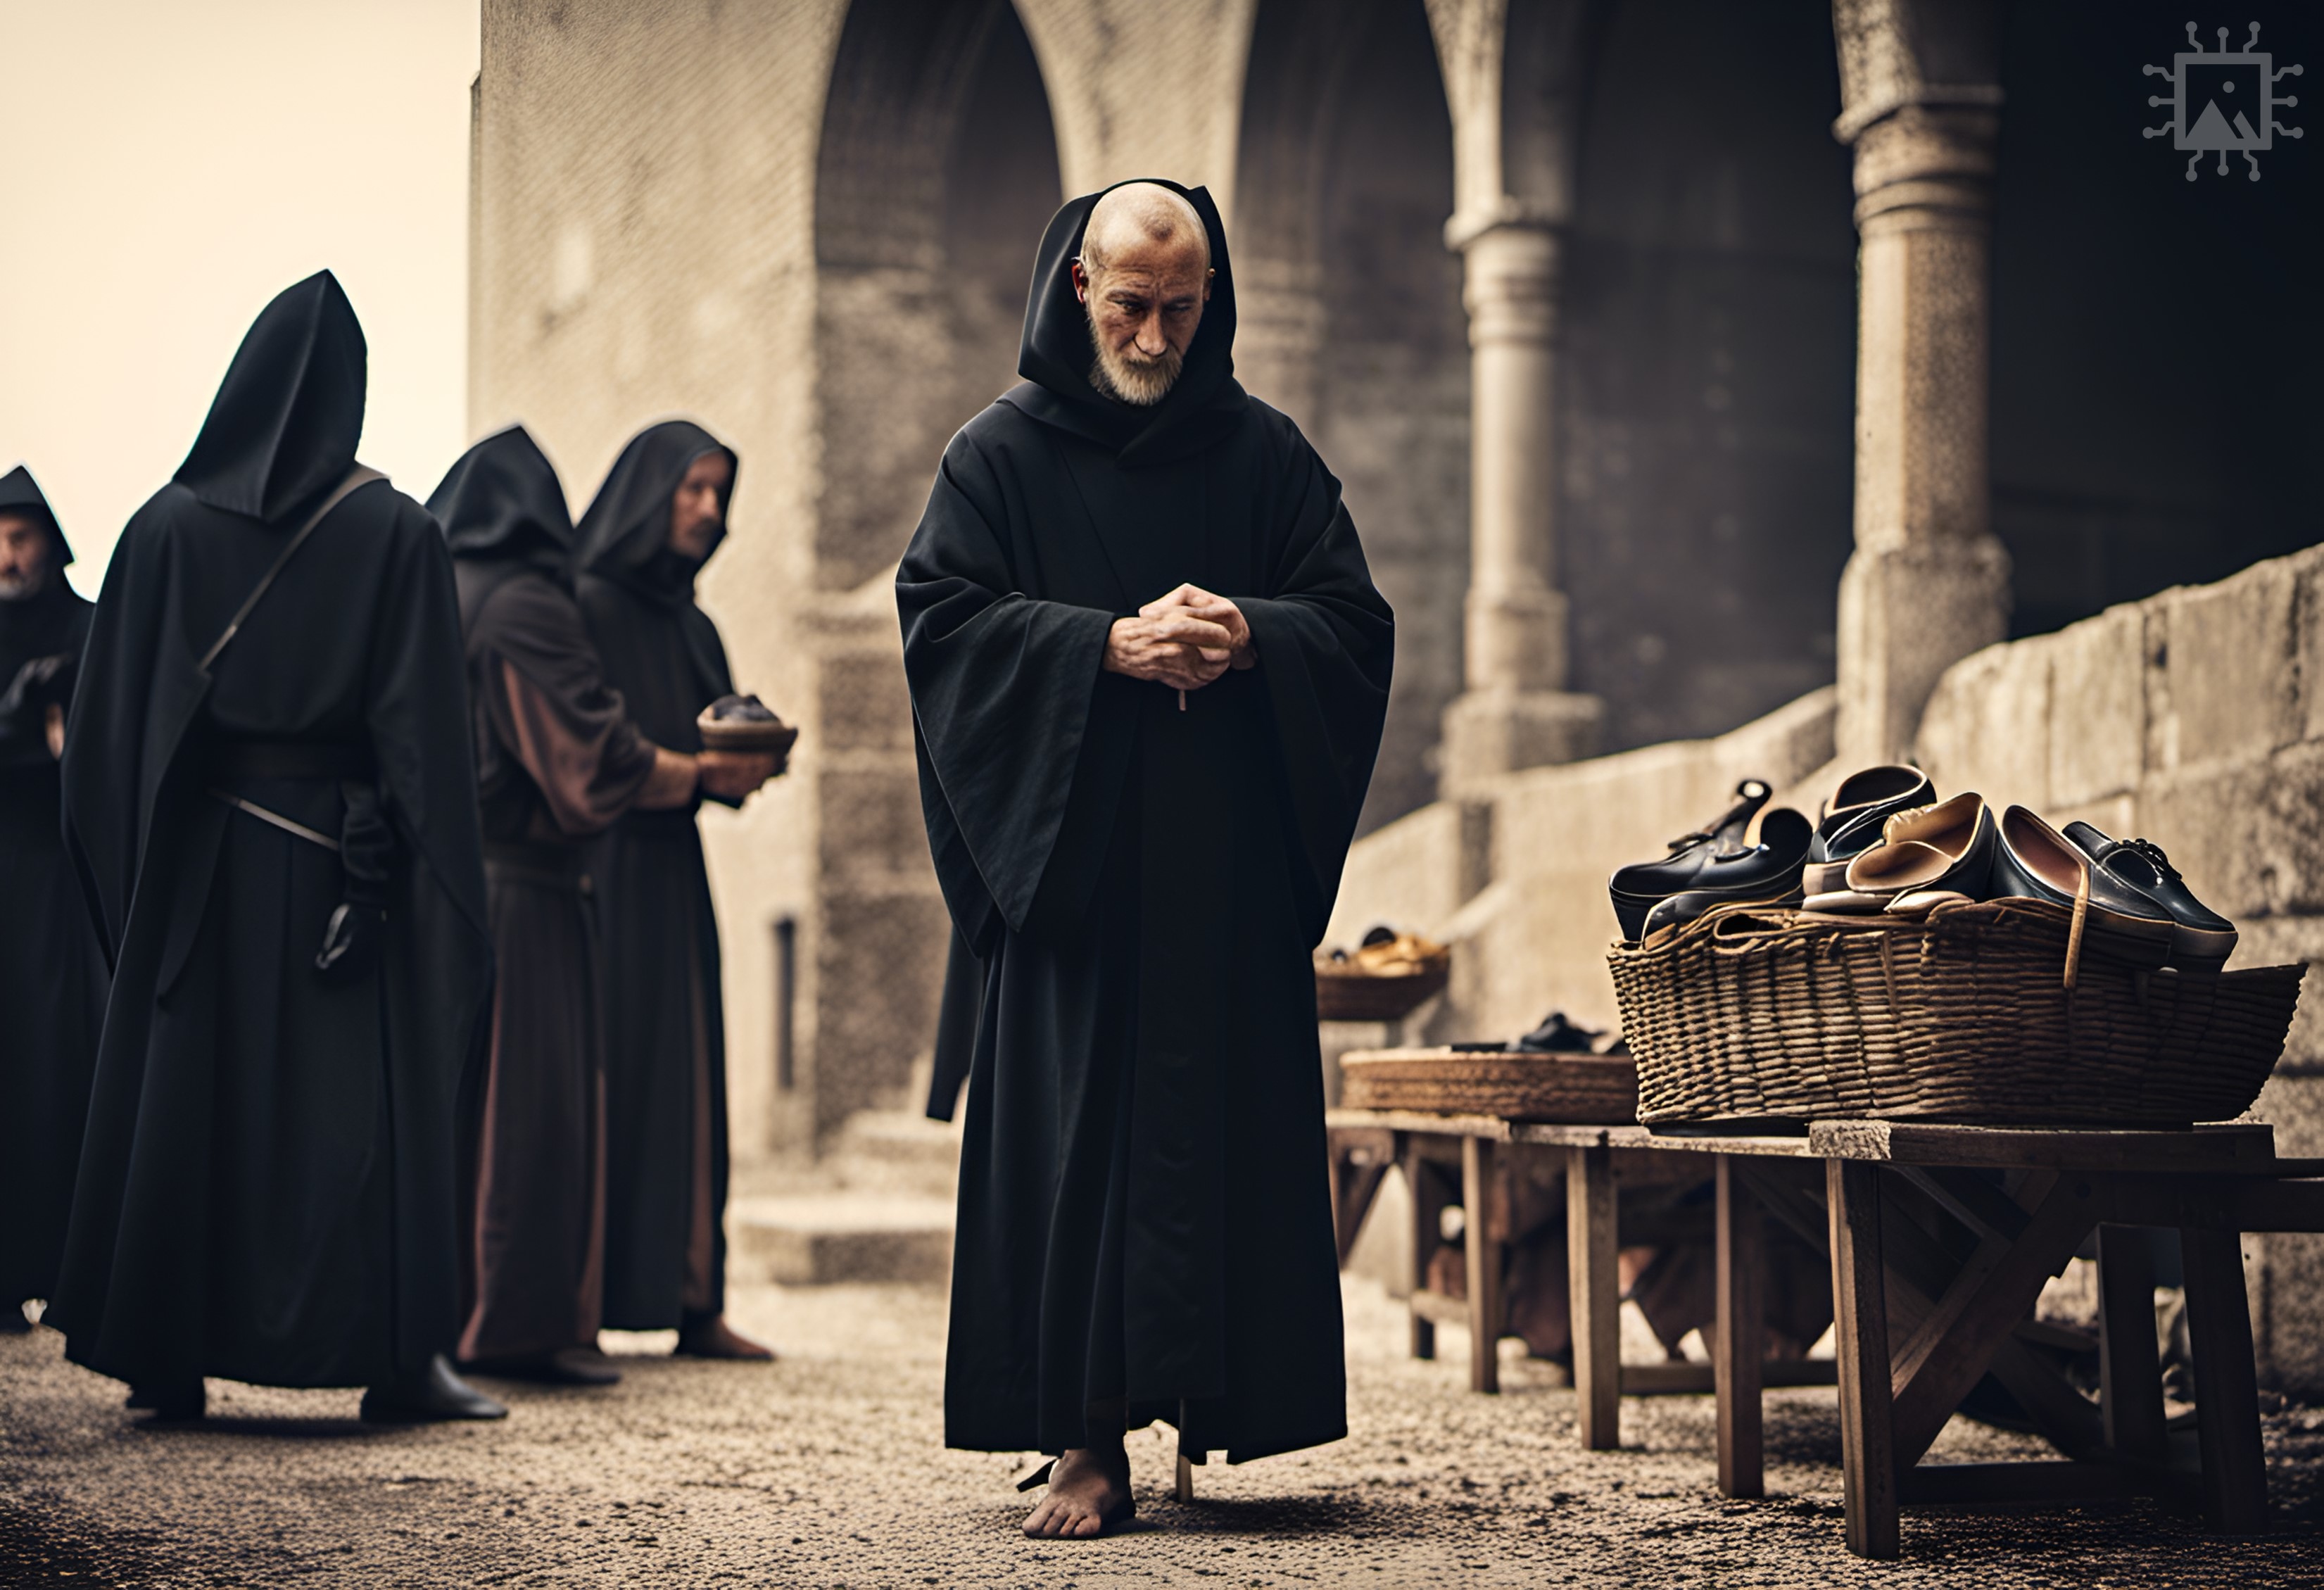 Artificial Intelligence-generated image produced using DreamStudio [accessed 13-08-2023]: ‘An early medieval Benedictine monk in a black robe distributing clothing and shoes to other monks.’ Find out more: rochestercathedral.org/research/ai